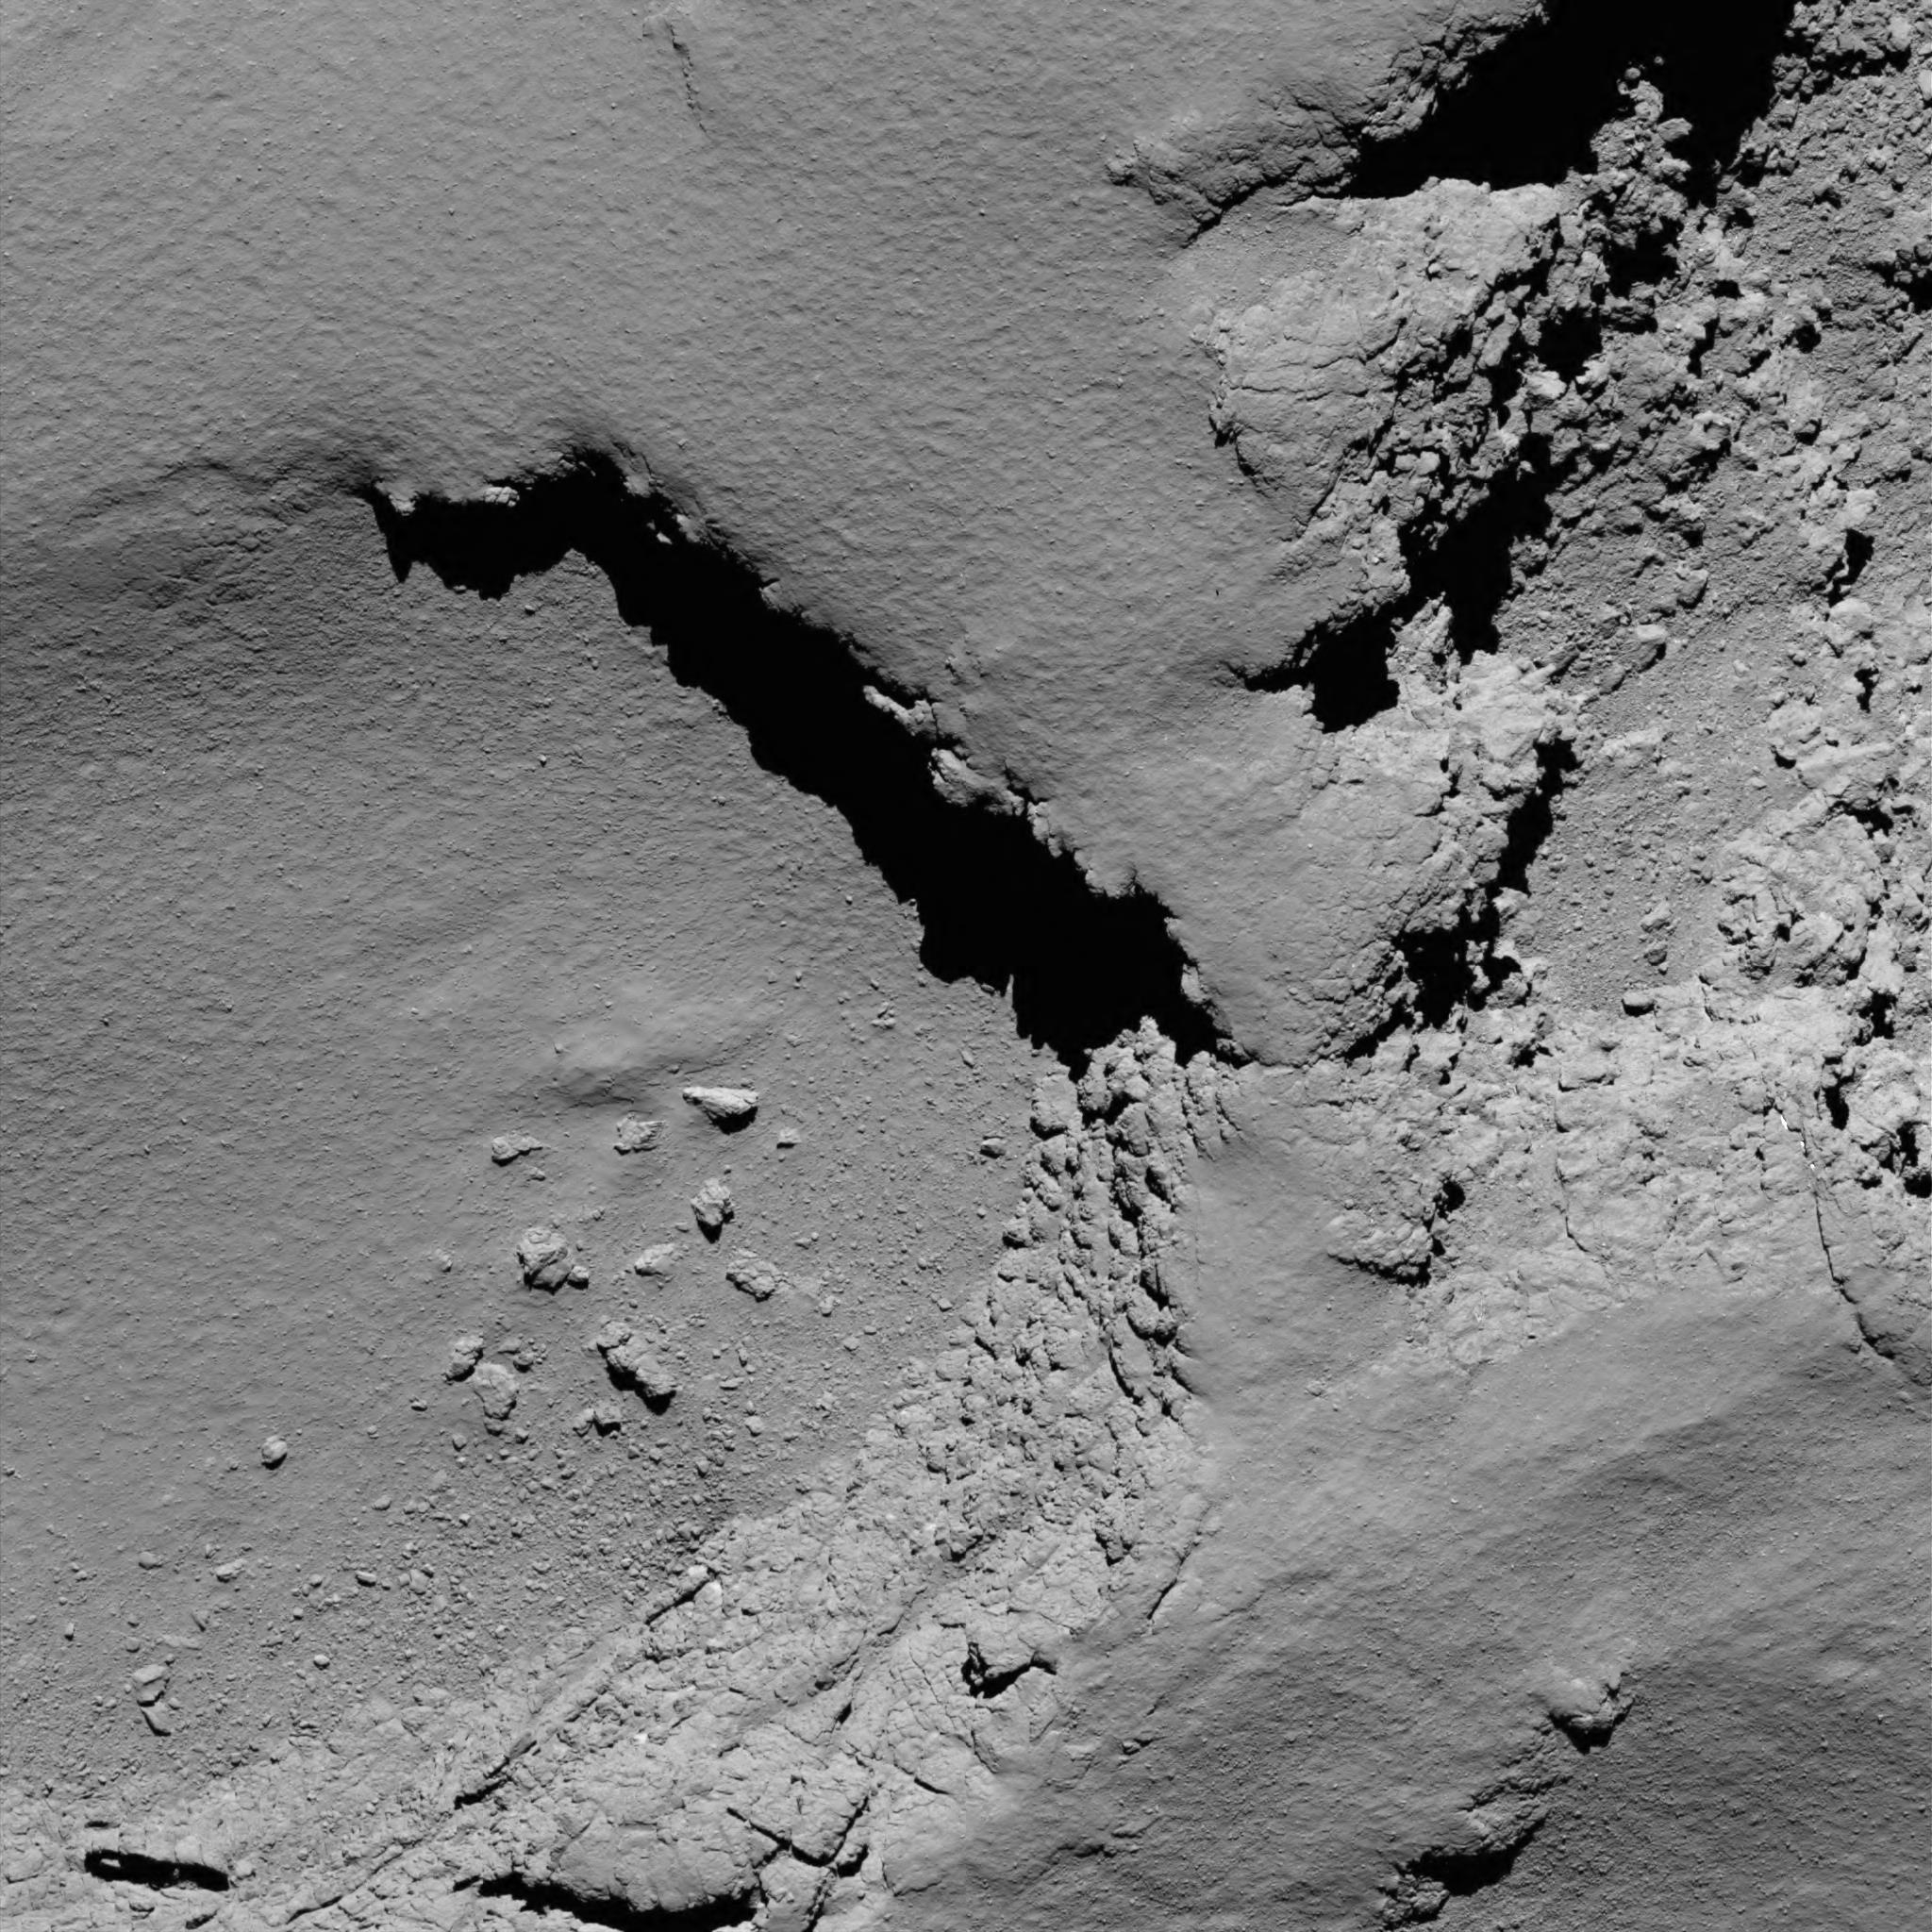 is_rosetta_atterrisage_comet_from_5.8_km_narrow-angle_camera.jpg